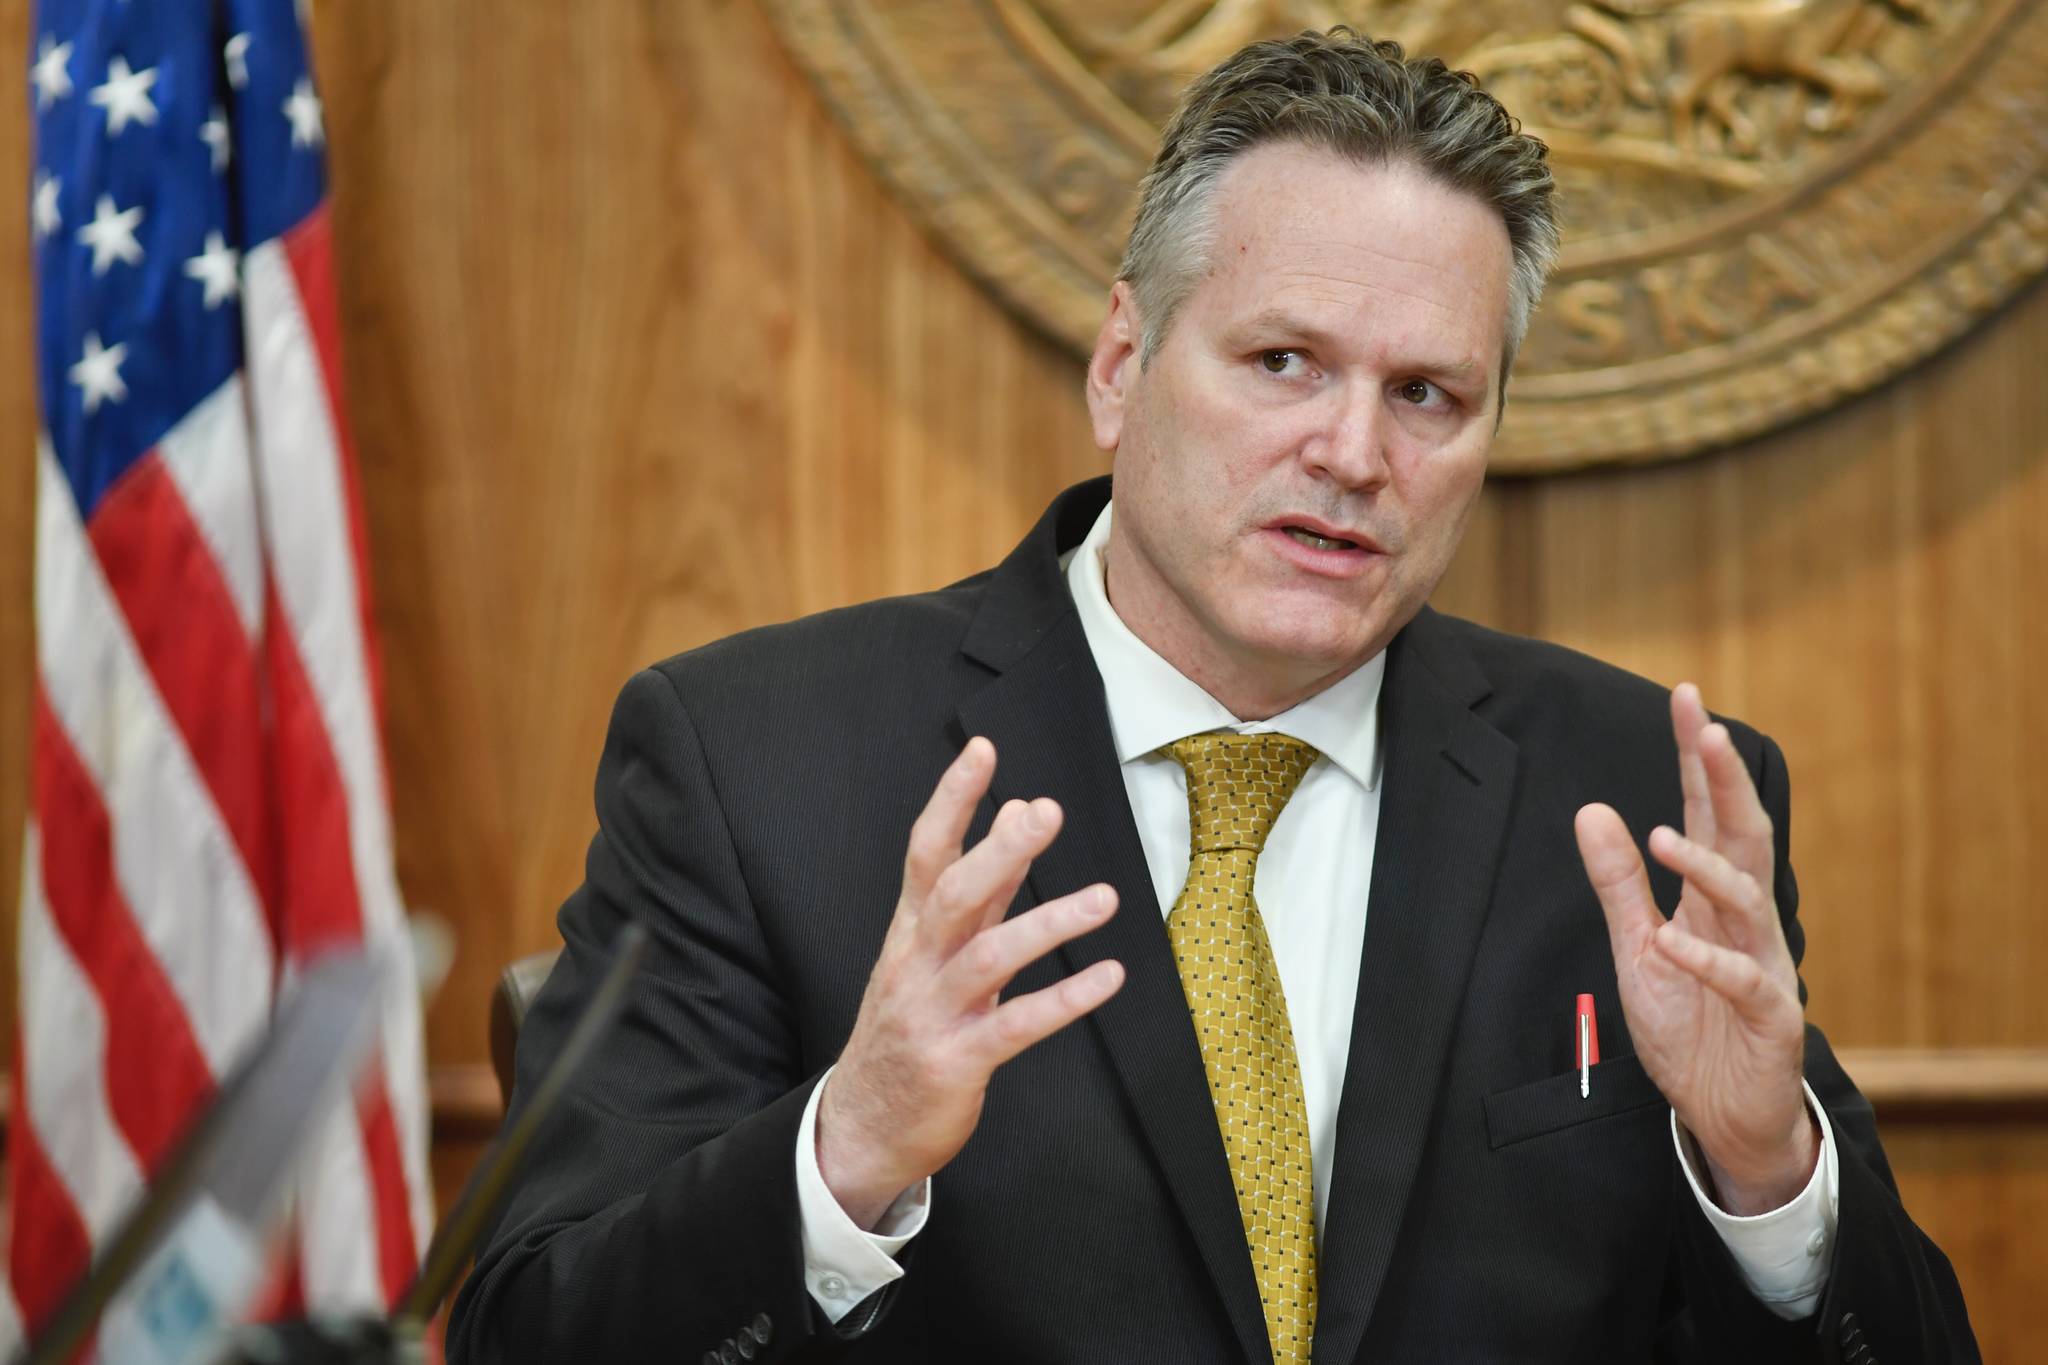 Gov. Mike Dunleavy speaks during a press conference at the Capitol on Tuesday, April 9, 2019. (Michael Penn | Juneau Empire)